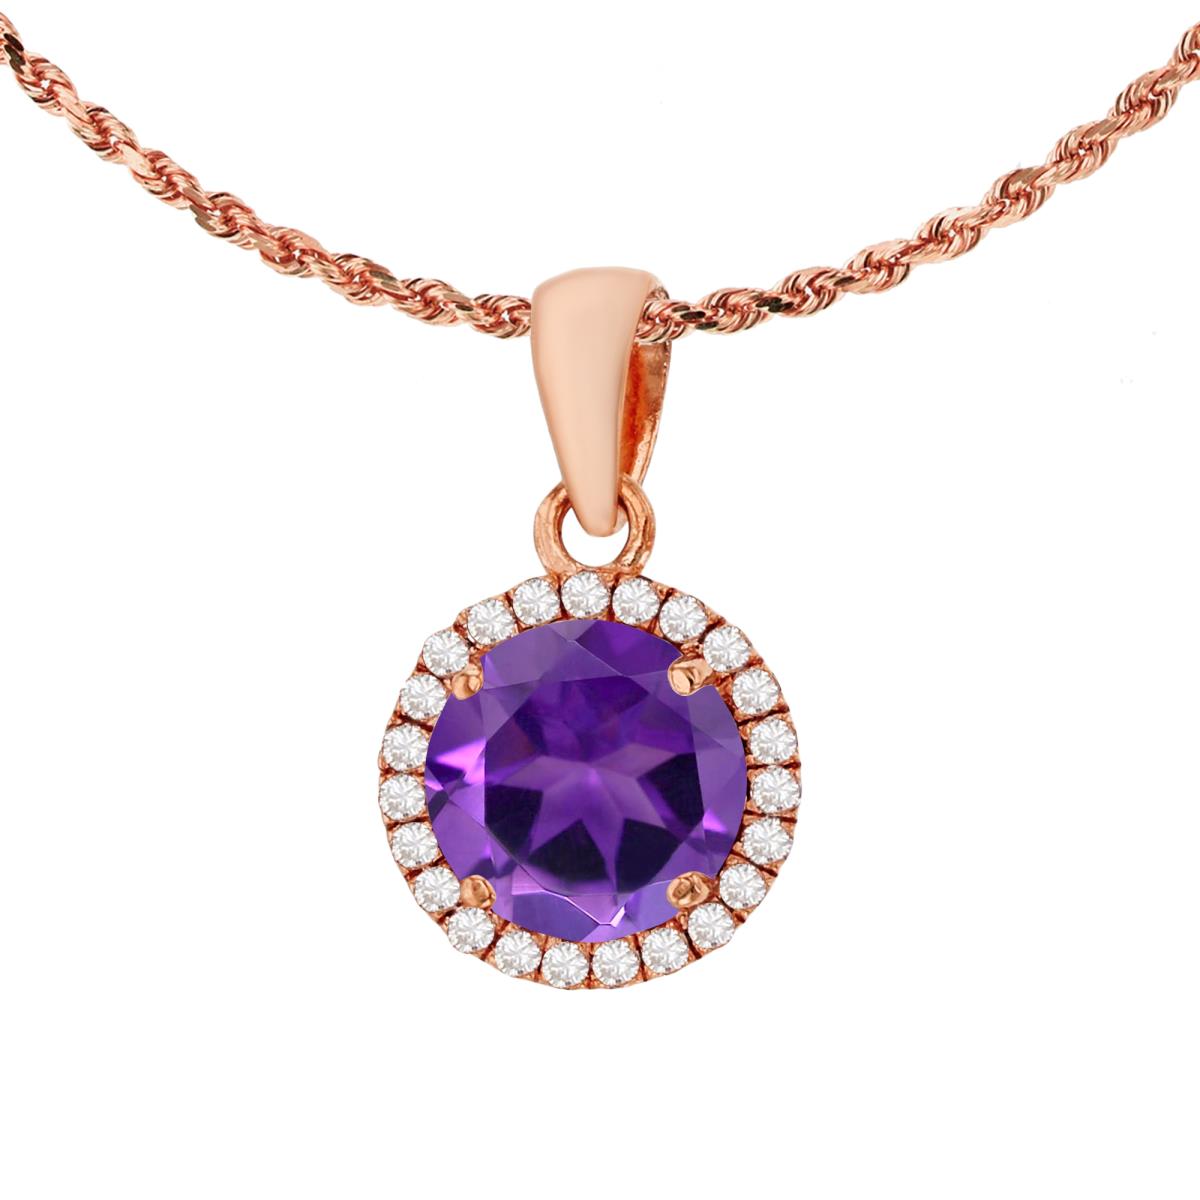 10K Rose Gold 7mm Round Amethyst & 0.12 CTTW Diamond Halo 18" Rope Chain Necklace